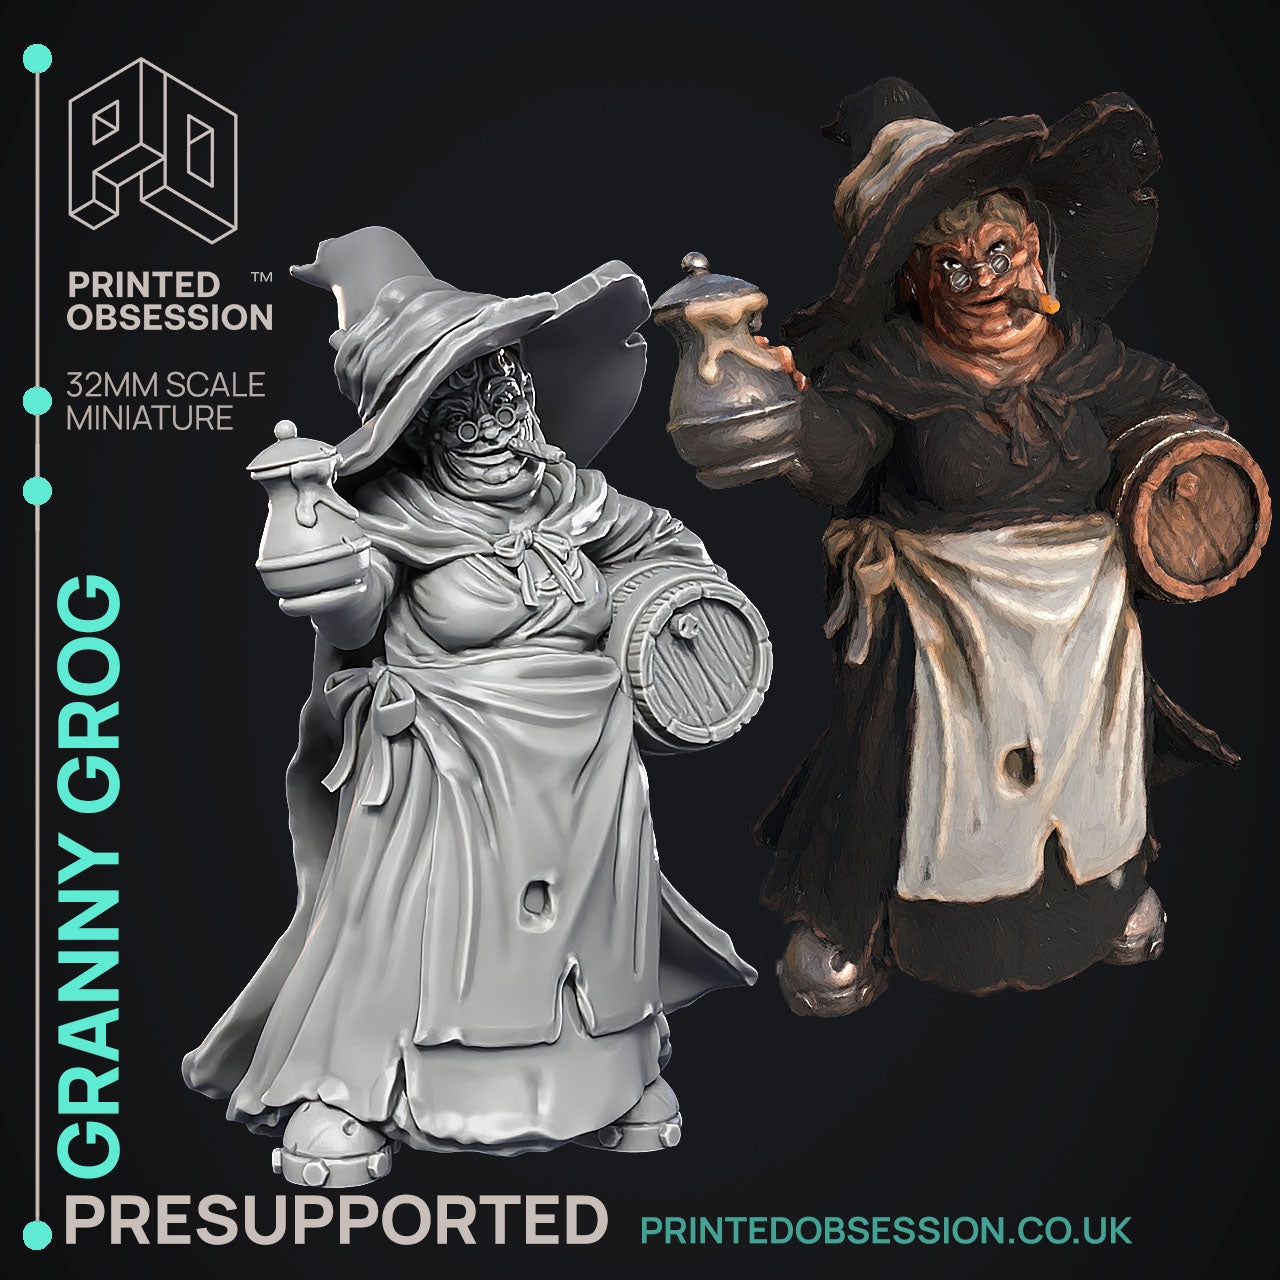 Granny Grog - The Discus World - The Printed Obsession - Table-top mini, 3D Printed Collectable for painting and playing!